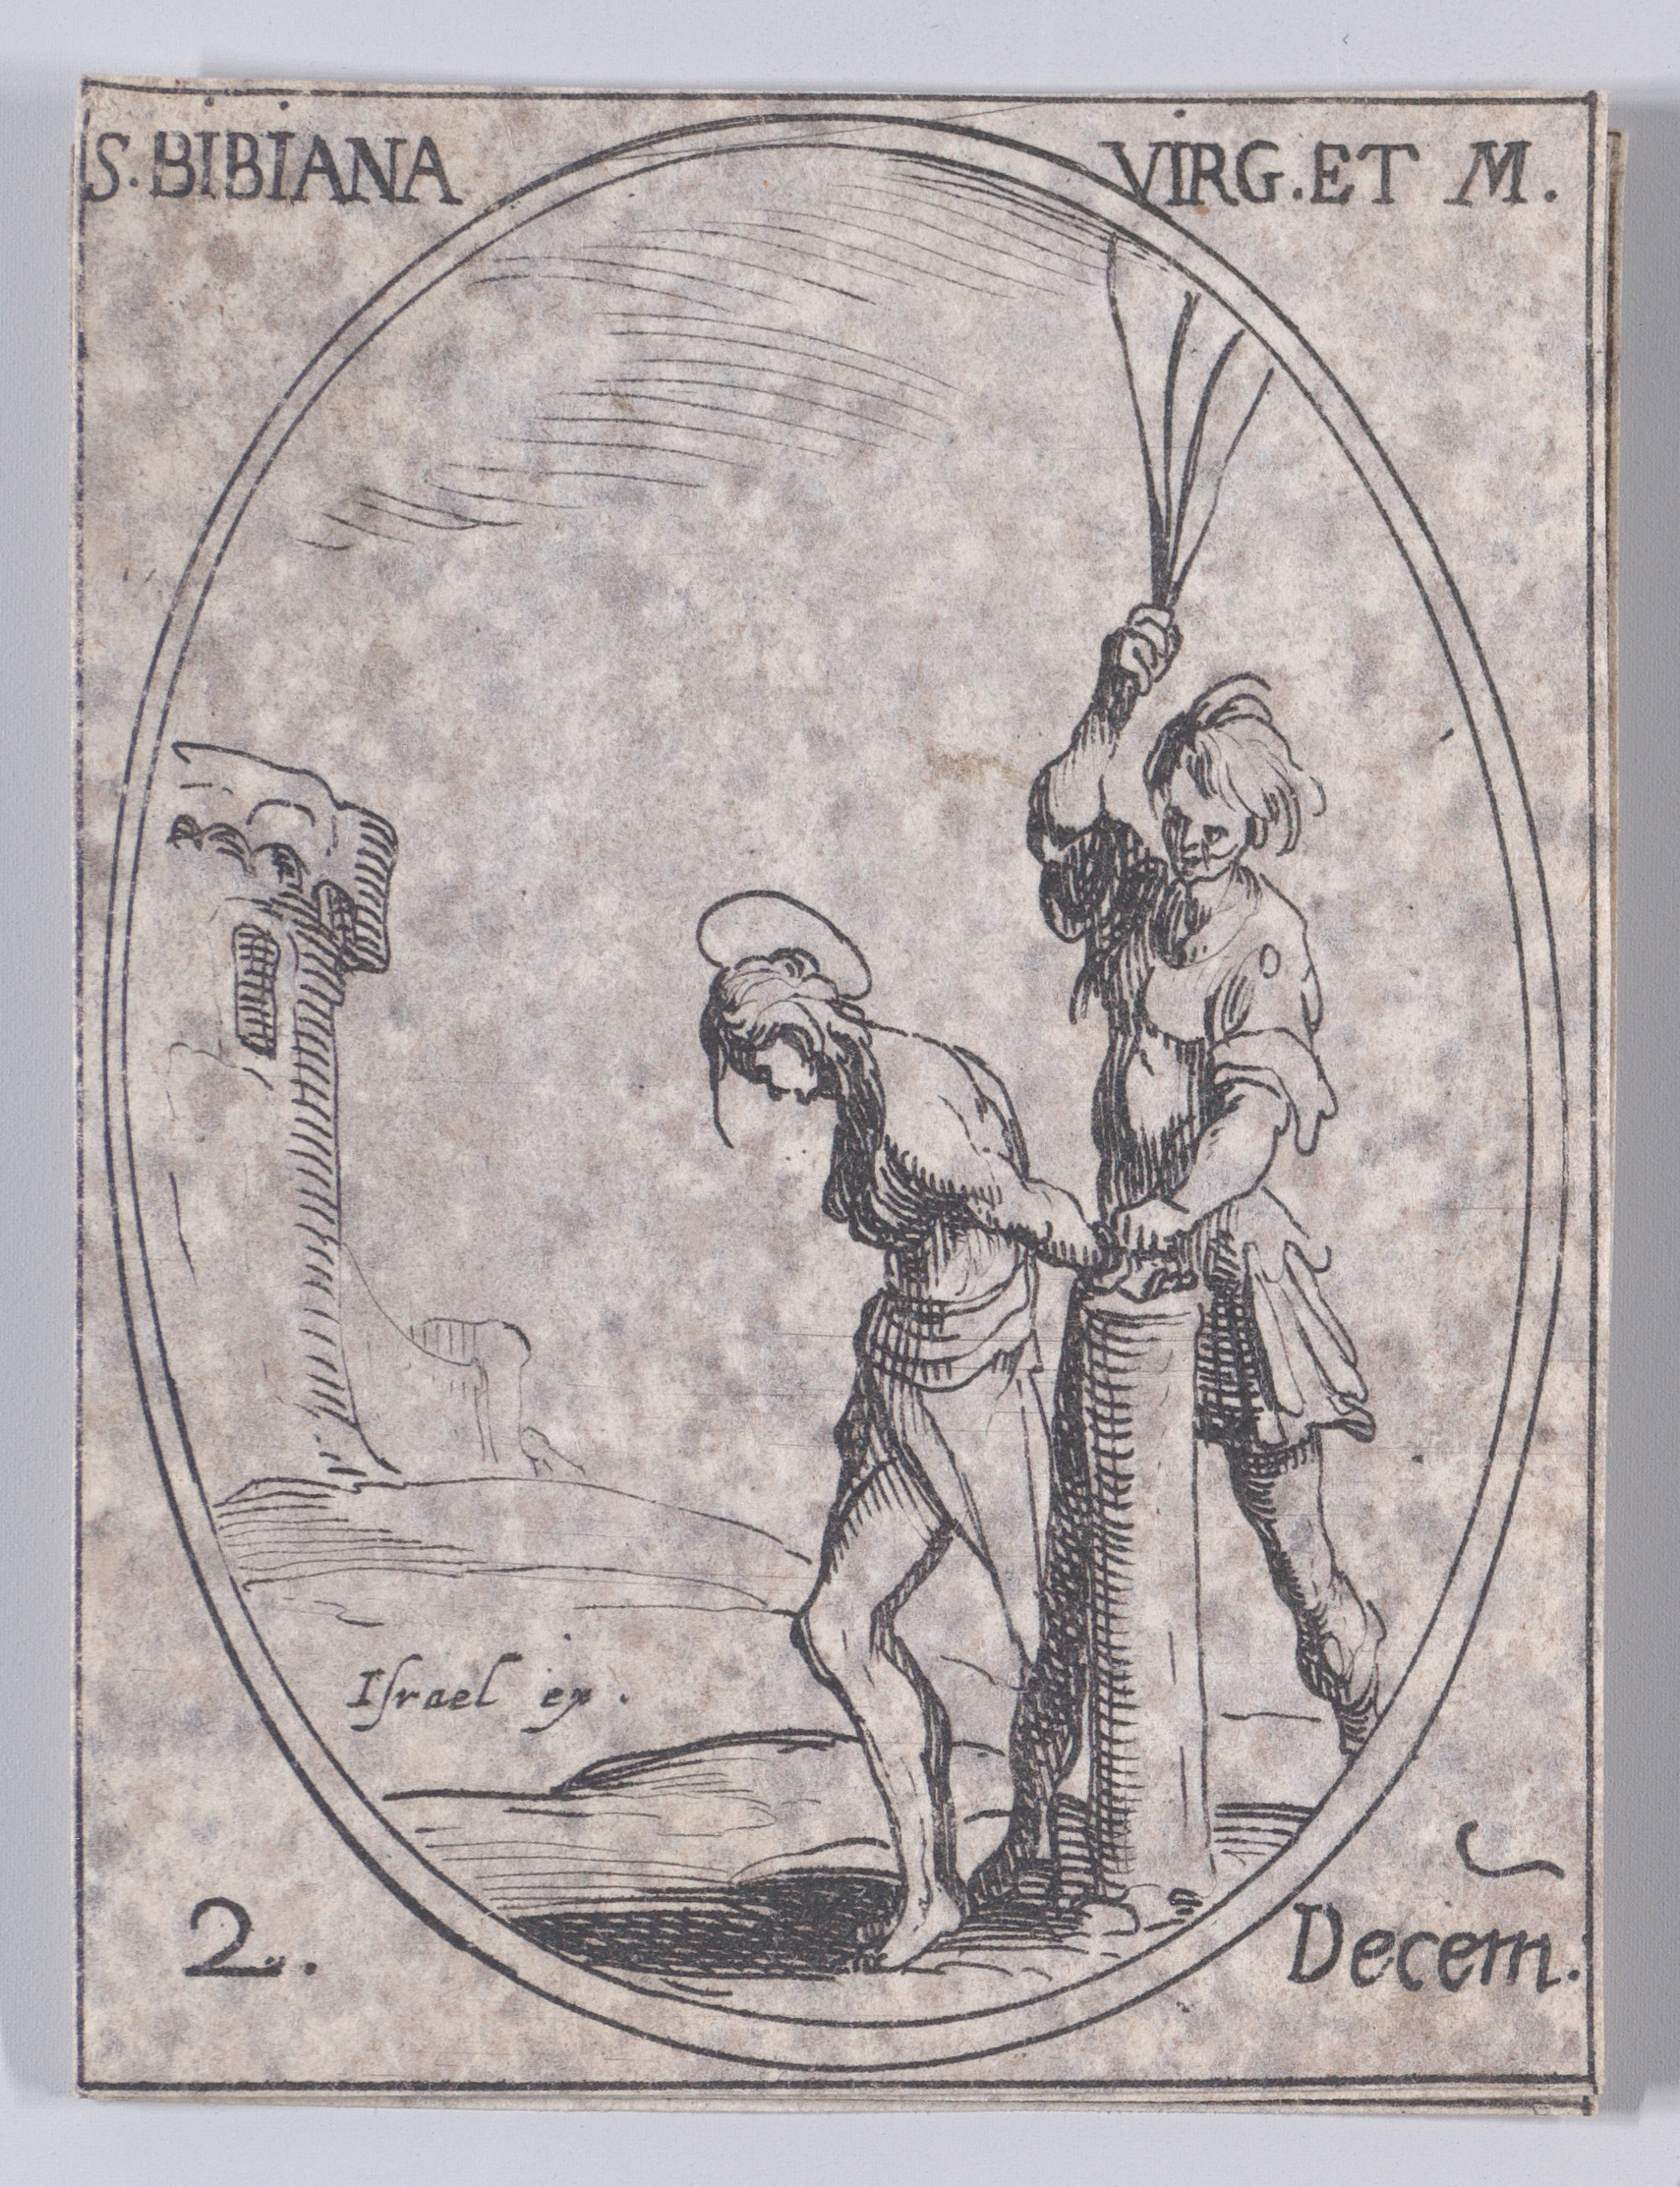 Ste. Bibienne, vierge et martyre (St. Bibiana, Virgin and Martyr), December 2nd, from Les Images De Tous Les Saincts et Saintes de L'Année (Images of All of the Saints and Religious Events of the Year), Jacques Callot (French, Nancy 1592–1635 Nancy), Etching; second state of two (Lieure)